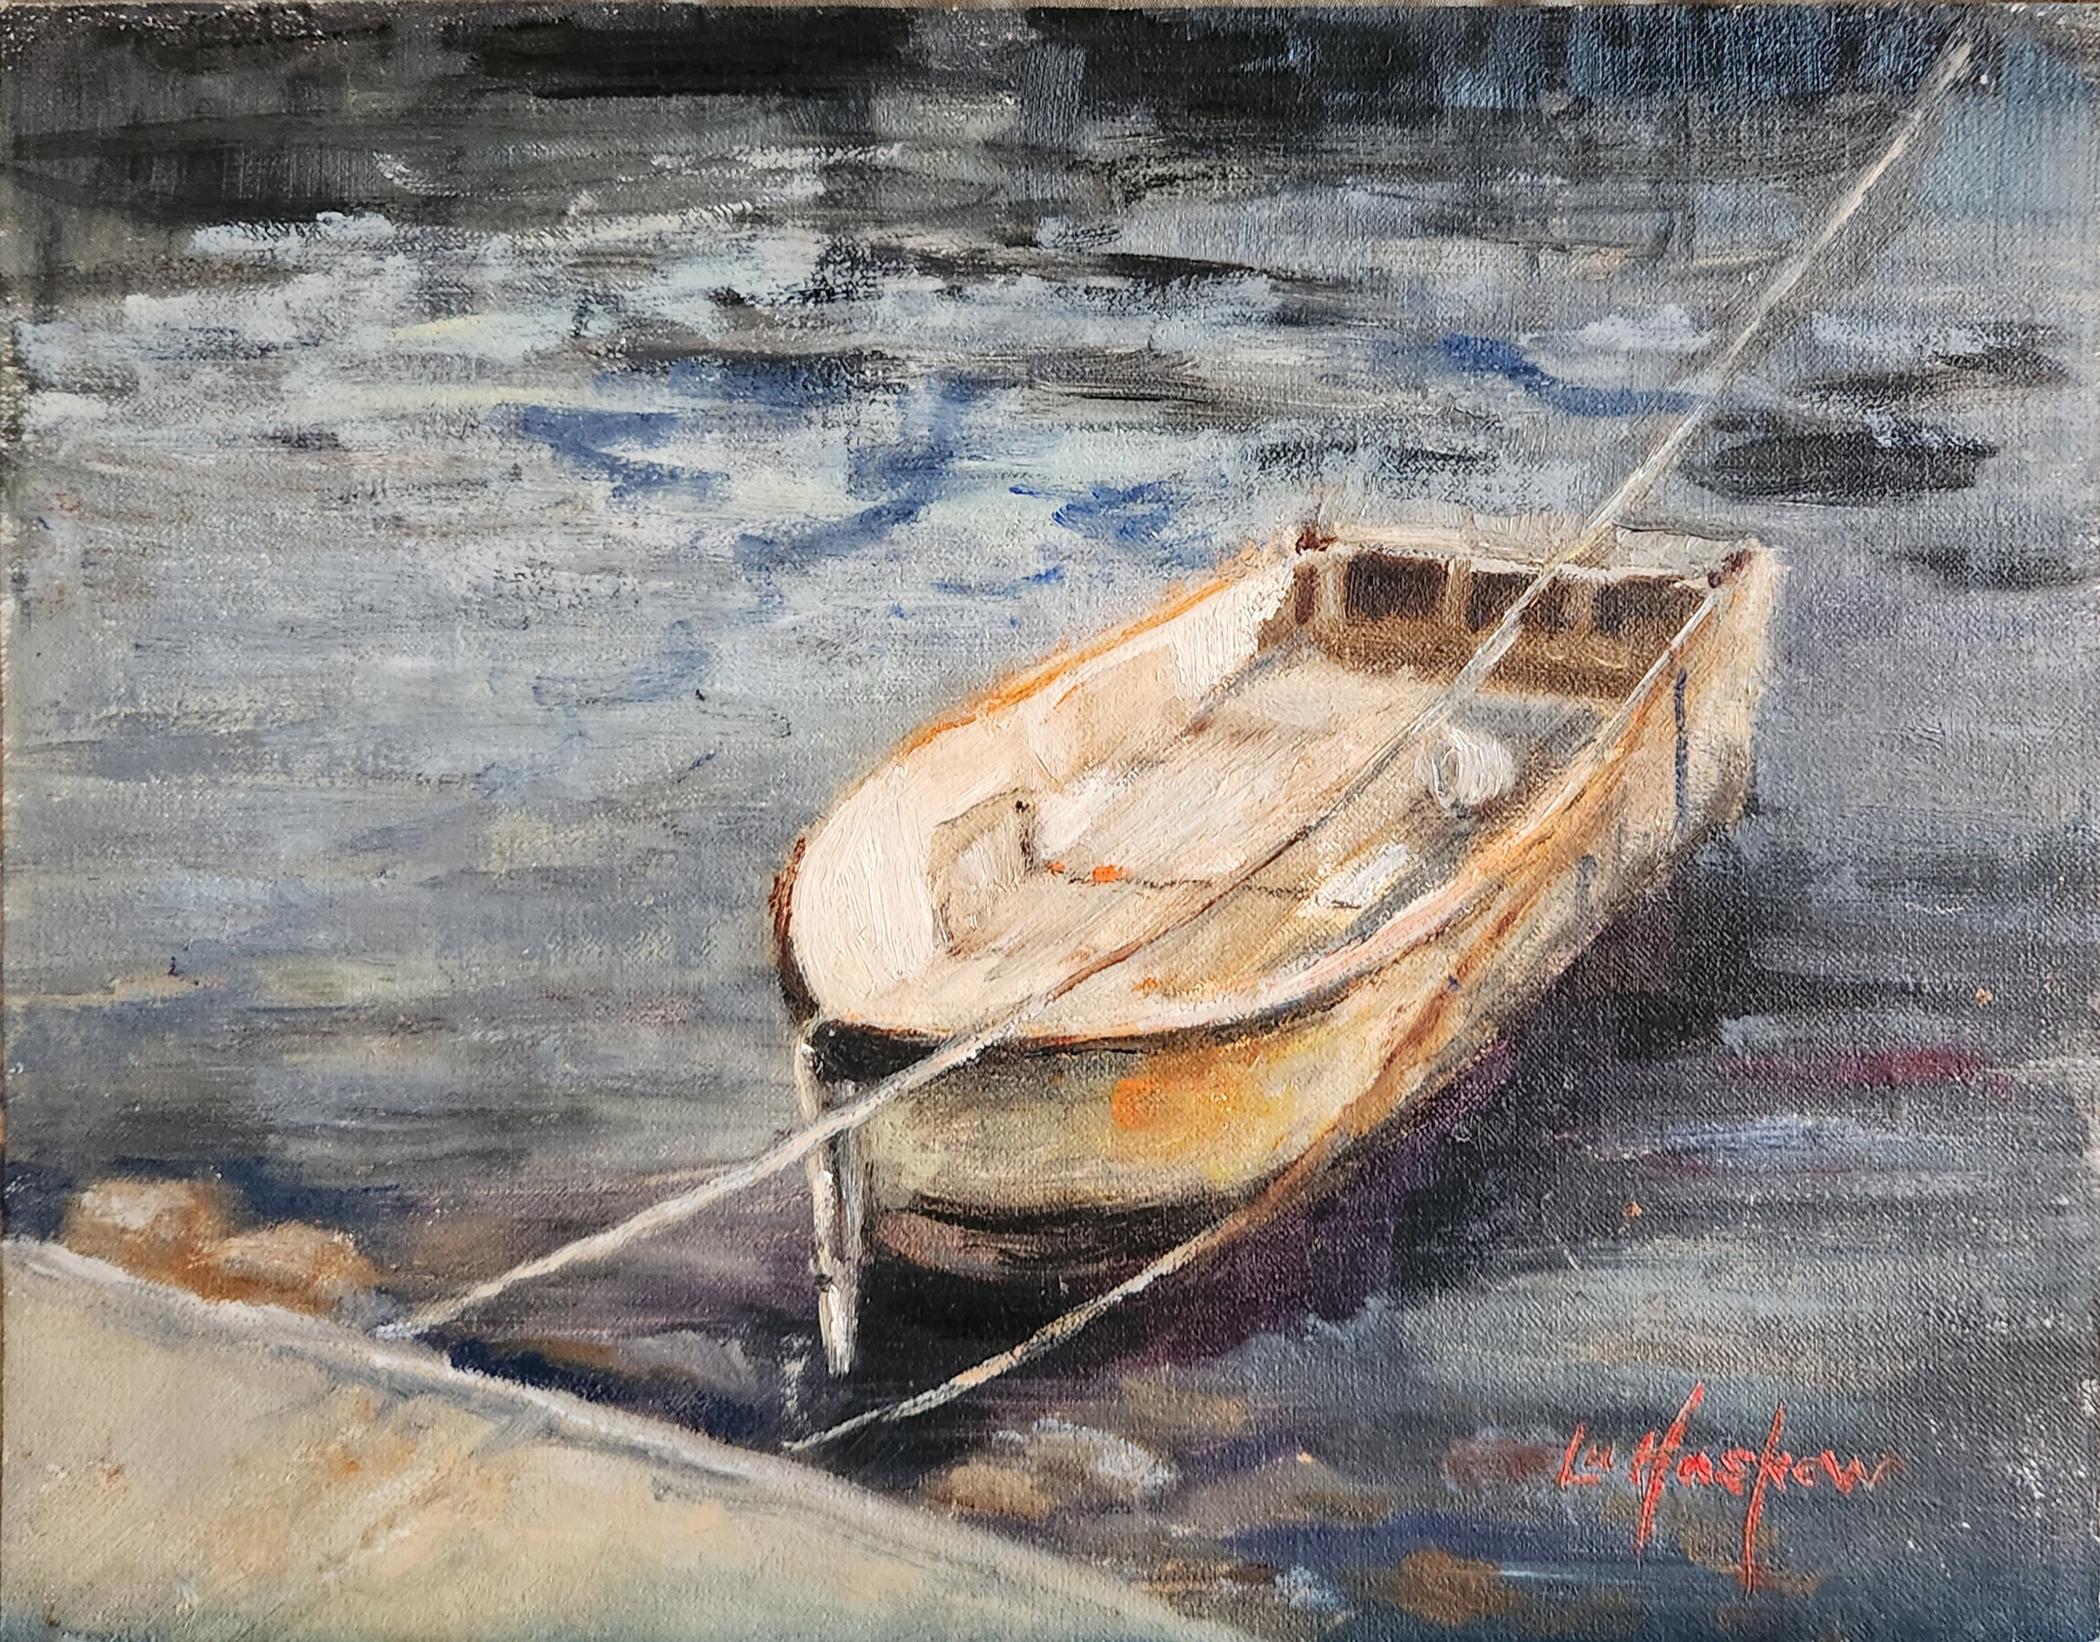 Not Fishing Today, 8x10" oil on board - Painting by Lu Haskew